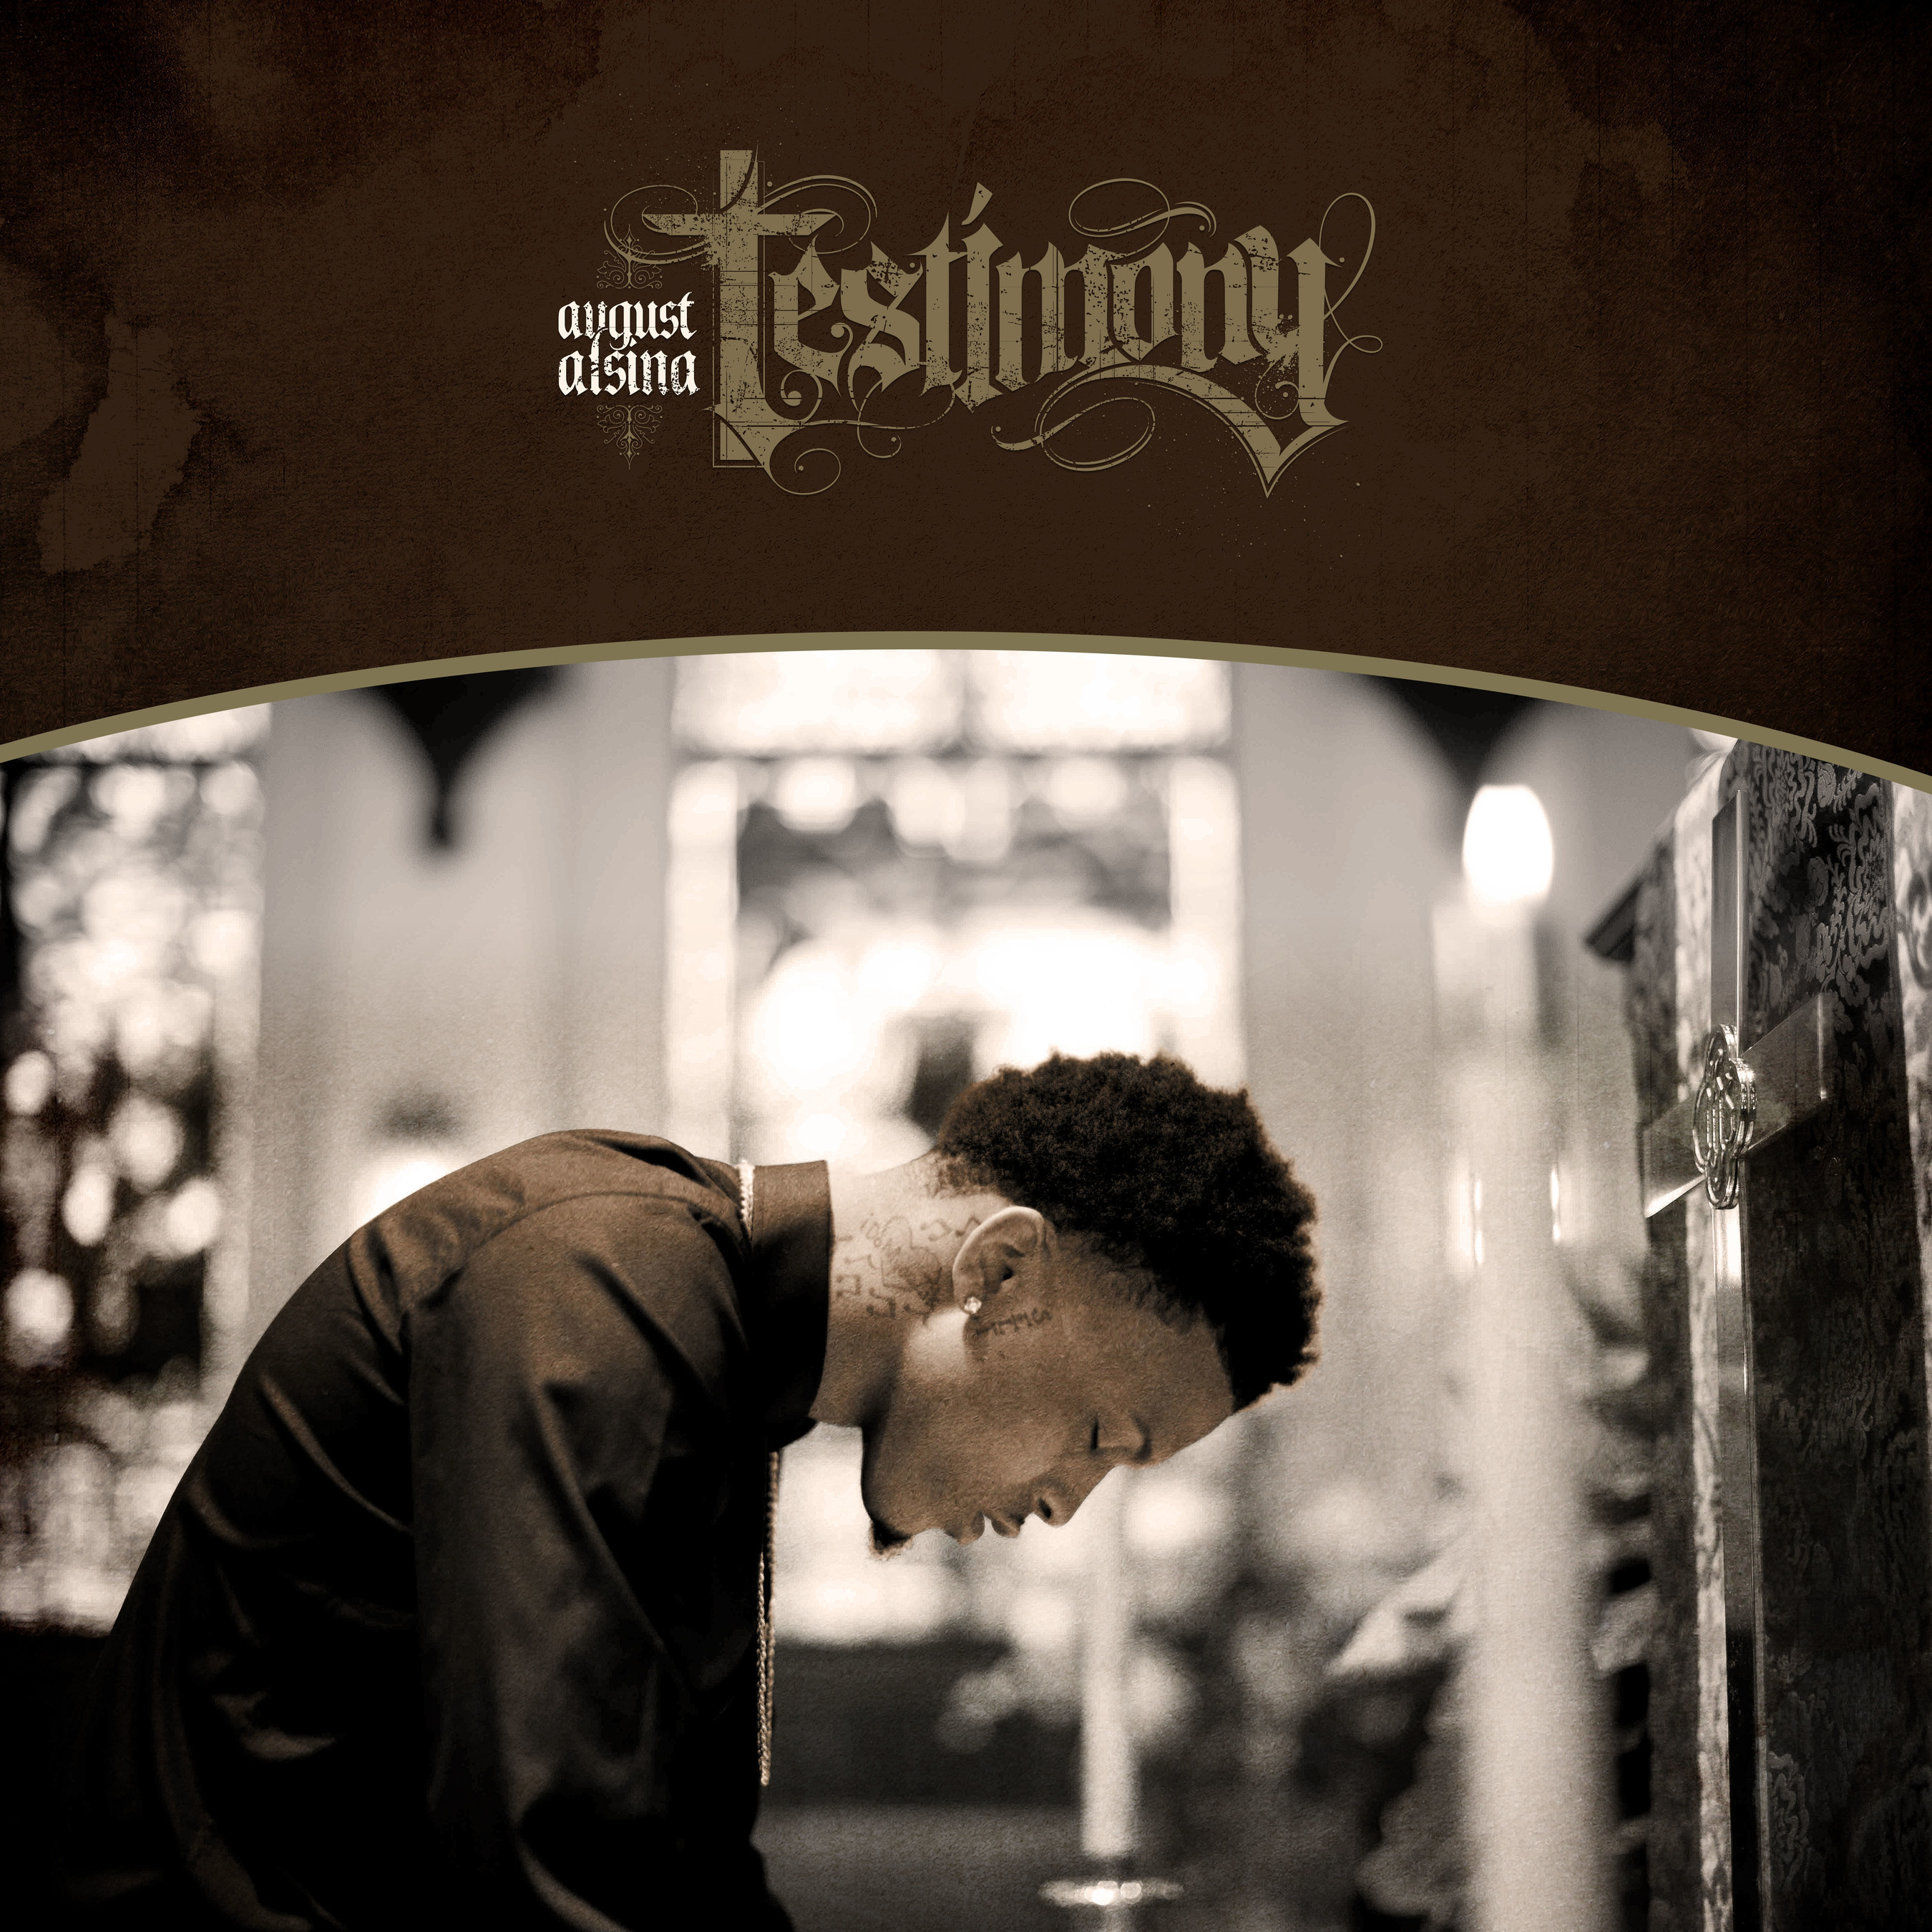 AUGUST ALSINA’S TESTIMONY (NNTME/DEF JAM) REIGNS AS THE TOP ARTIST DEBUT ON THE BILLBOARD 200; ENTERS SOUNDSCAN R&B CHART AT #1 AND #2 OVERALL ON FIRST WEEK SALES OF 67,000 COPIES! (PRNewsFoto/Def Jam Recordings)